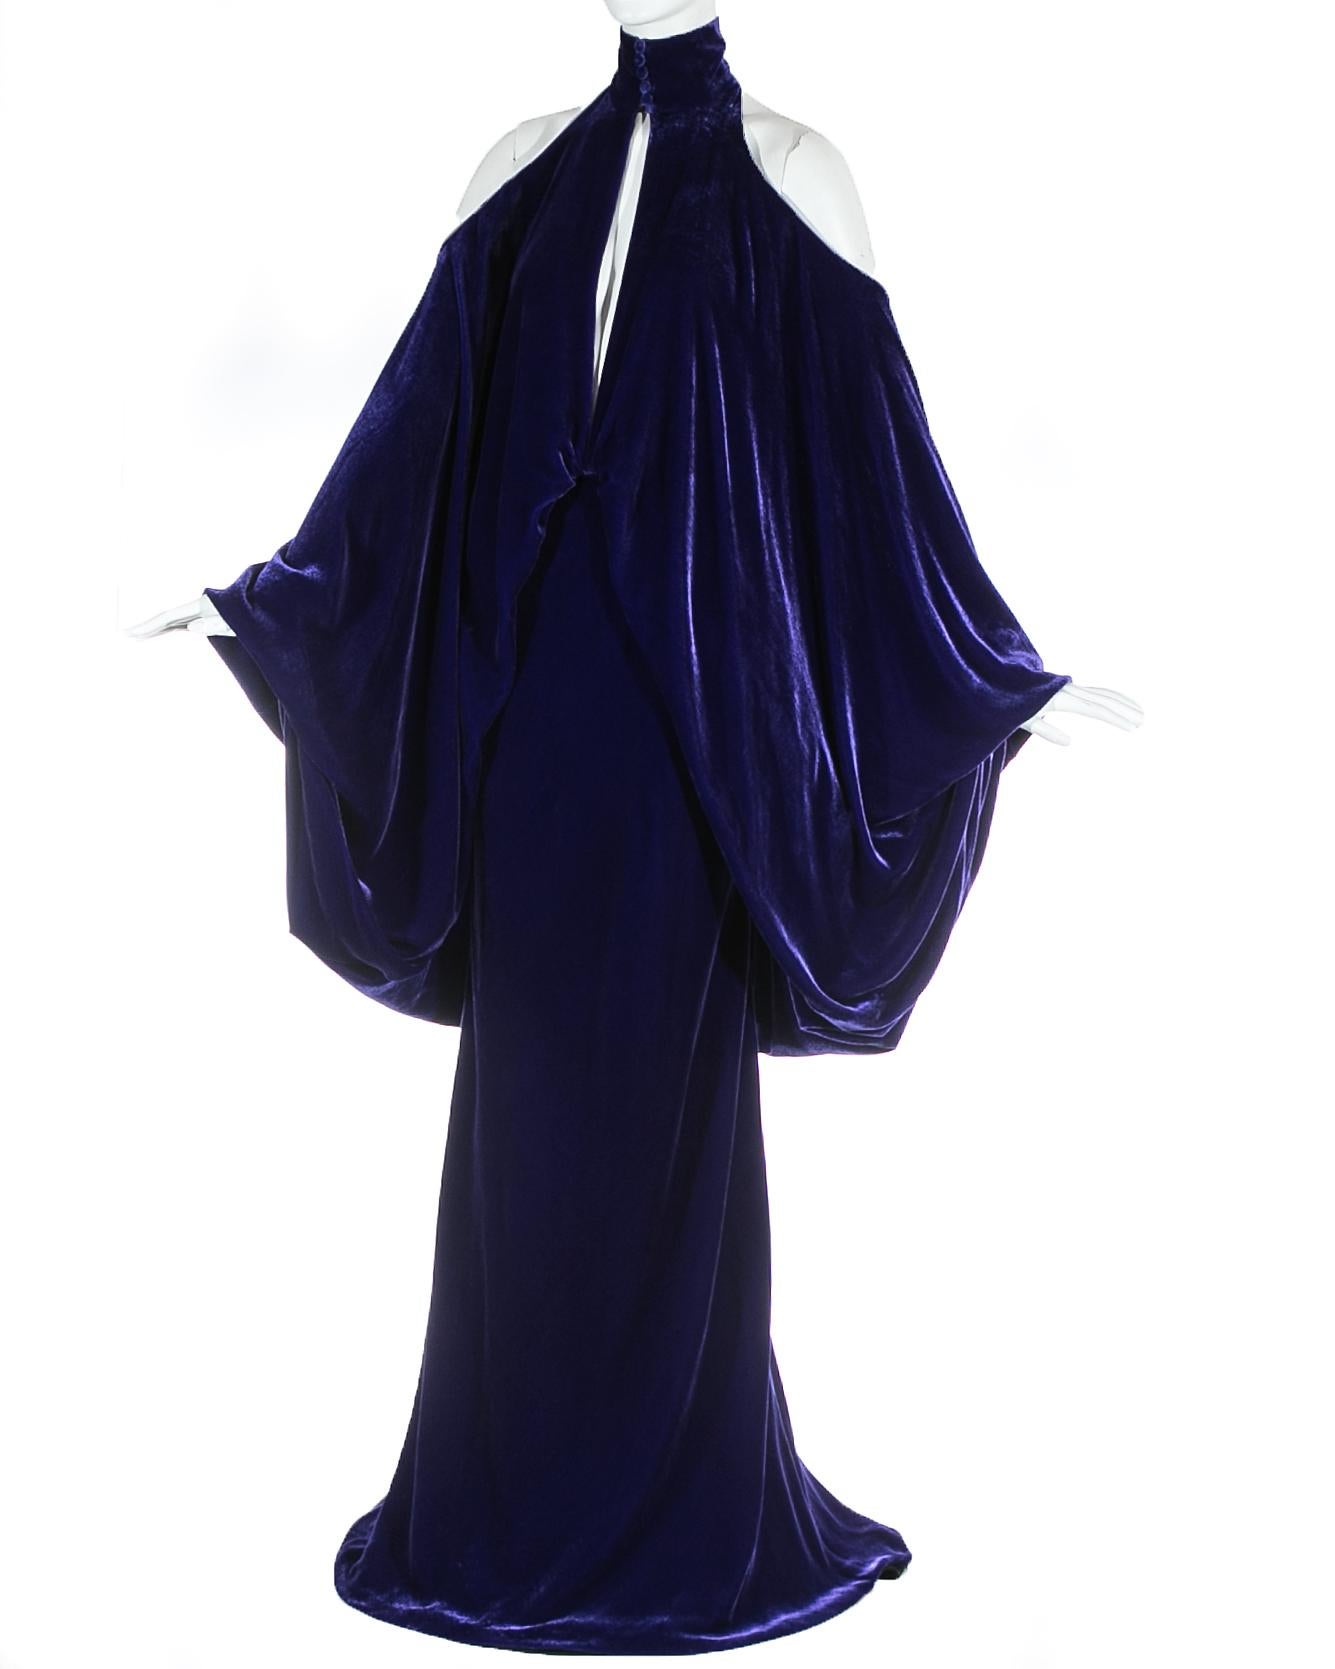 Purple velvet maxi dress with halter neck, open shoulders and back, peek-a-boo cleavage and exaggerated poet sleeves. 

Haute Couture Autumn-Winter 2005